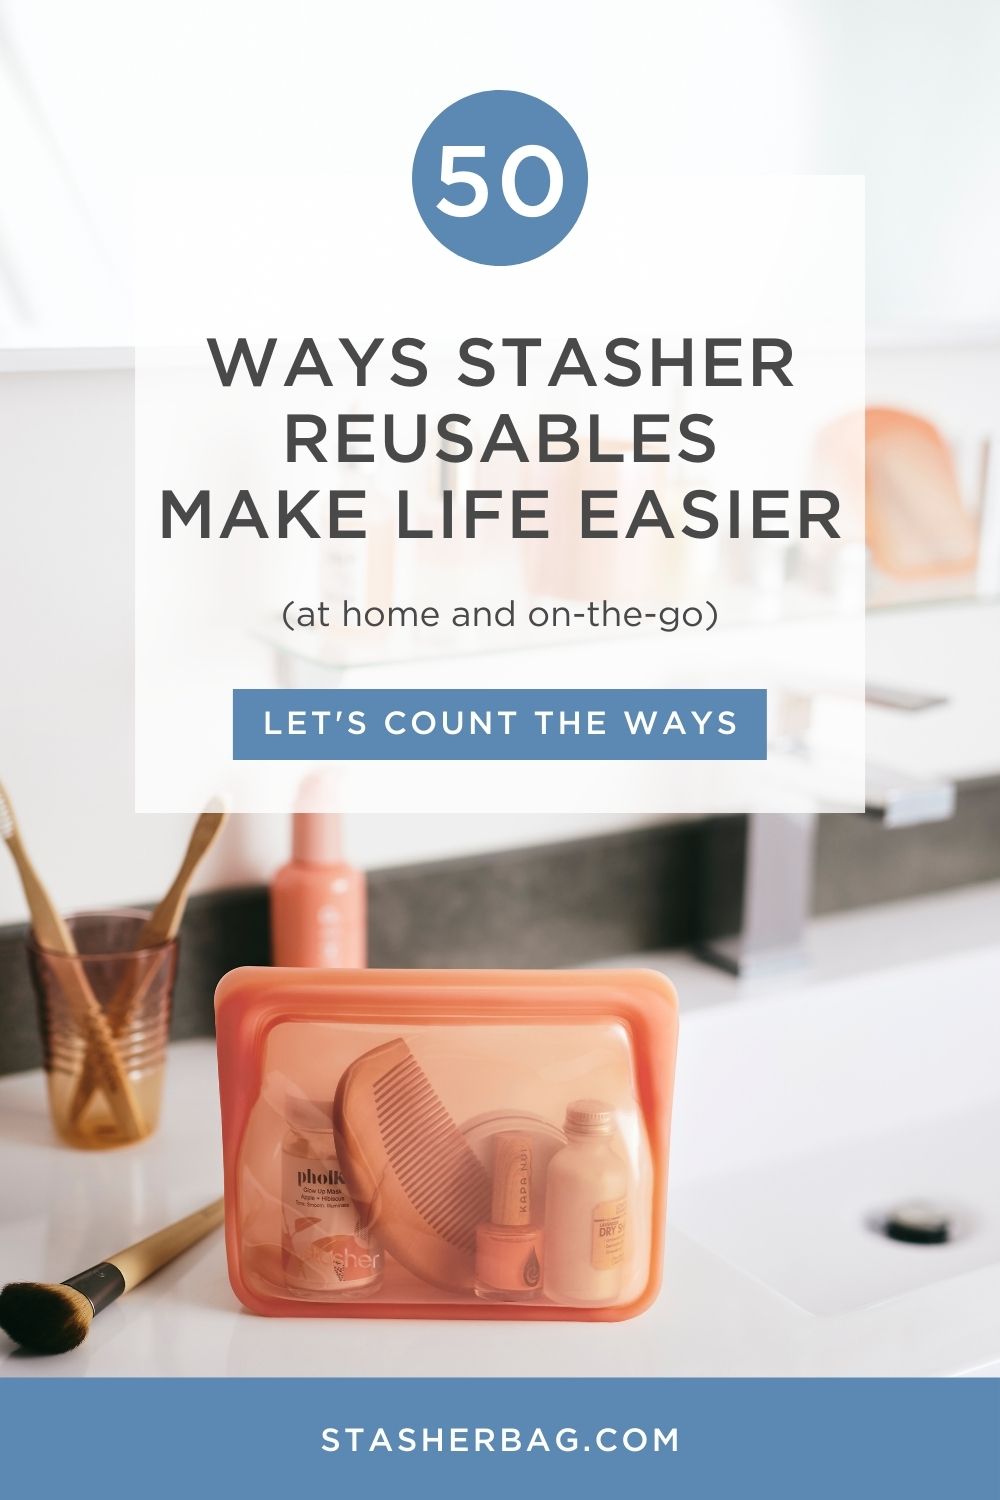 50 Ways to Use Stasher Bags and Bowls | Stasher